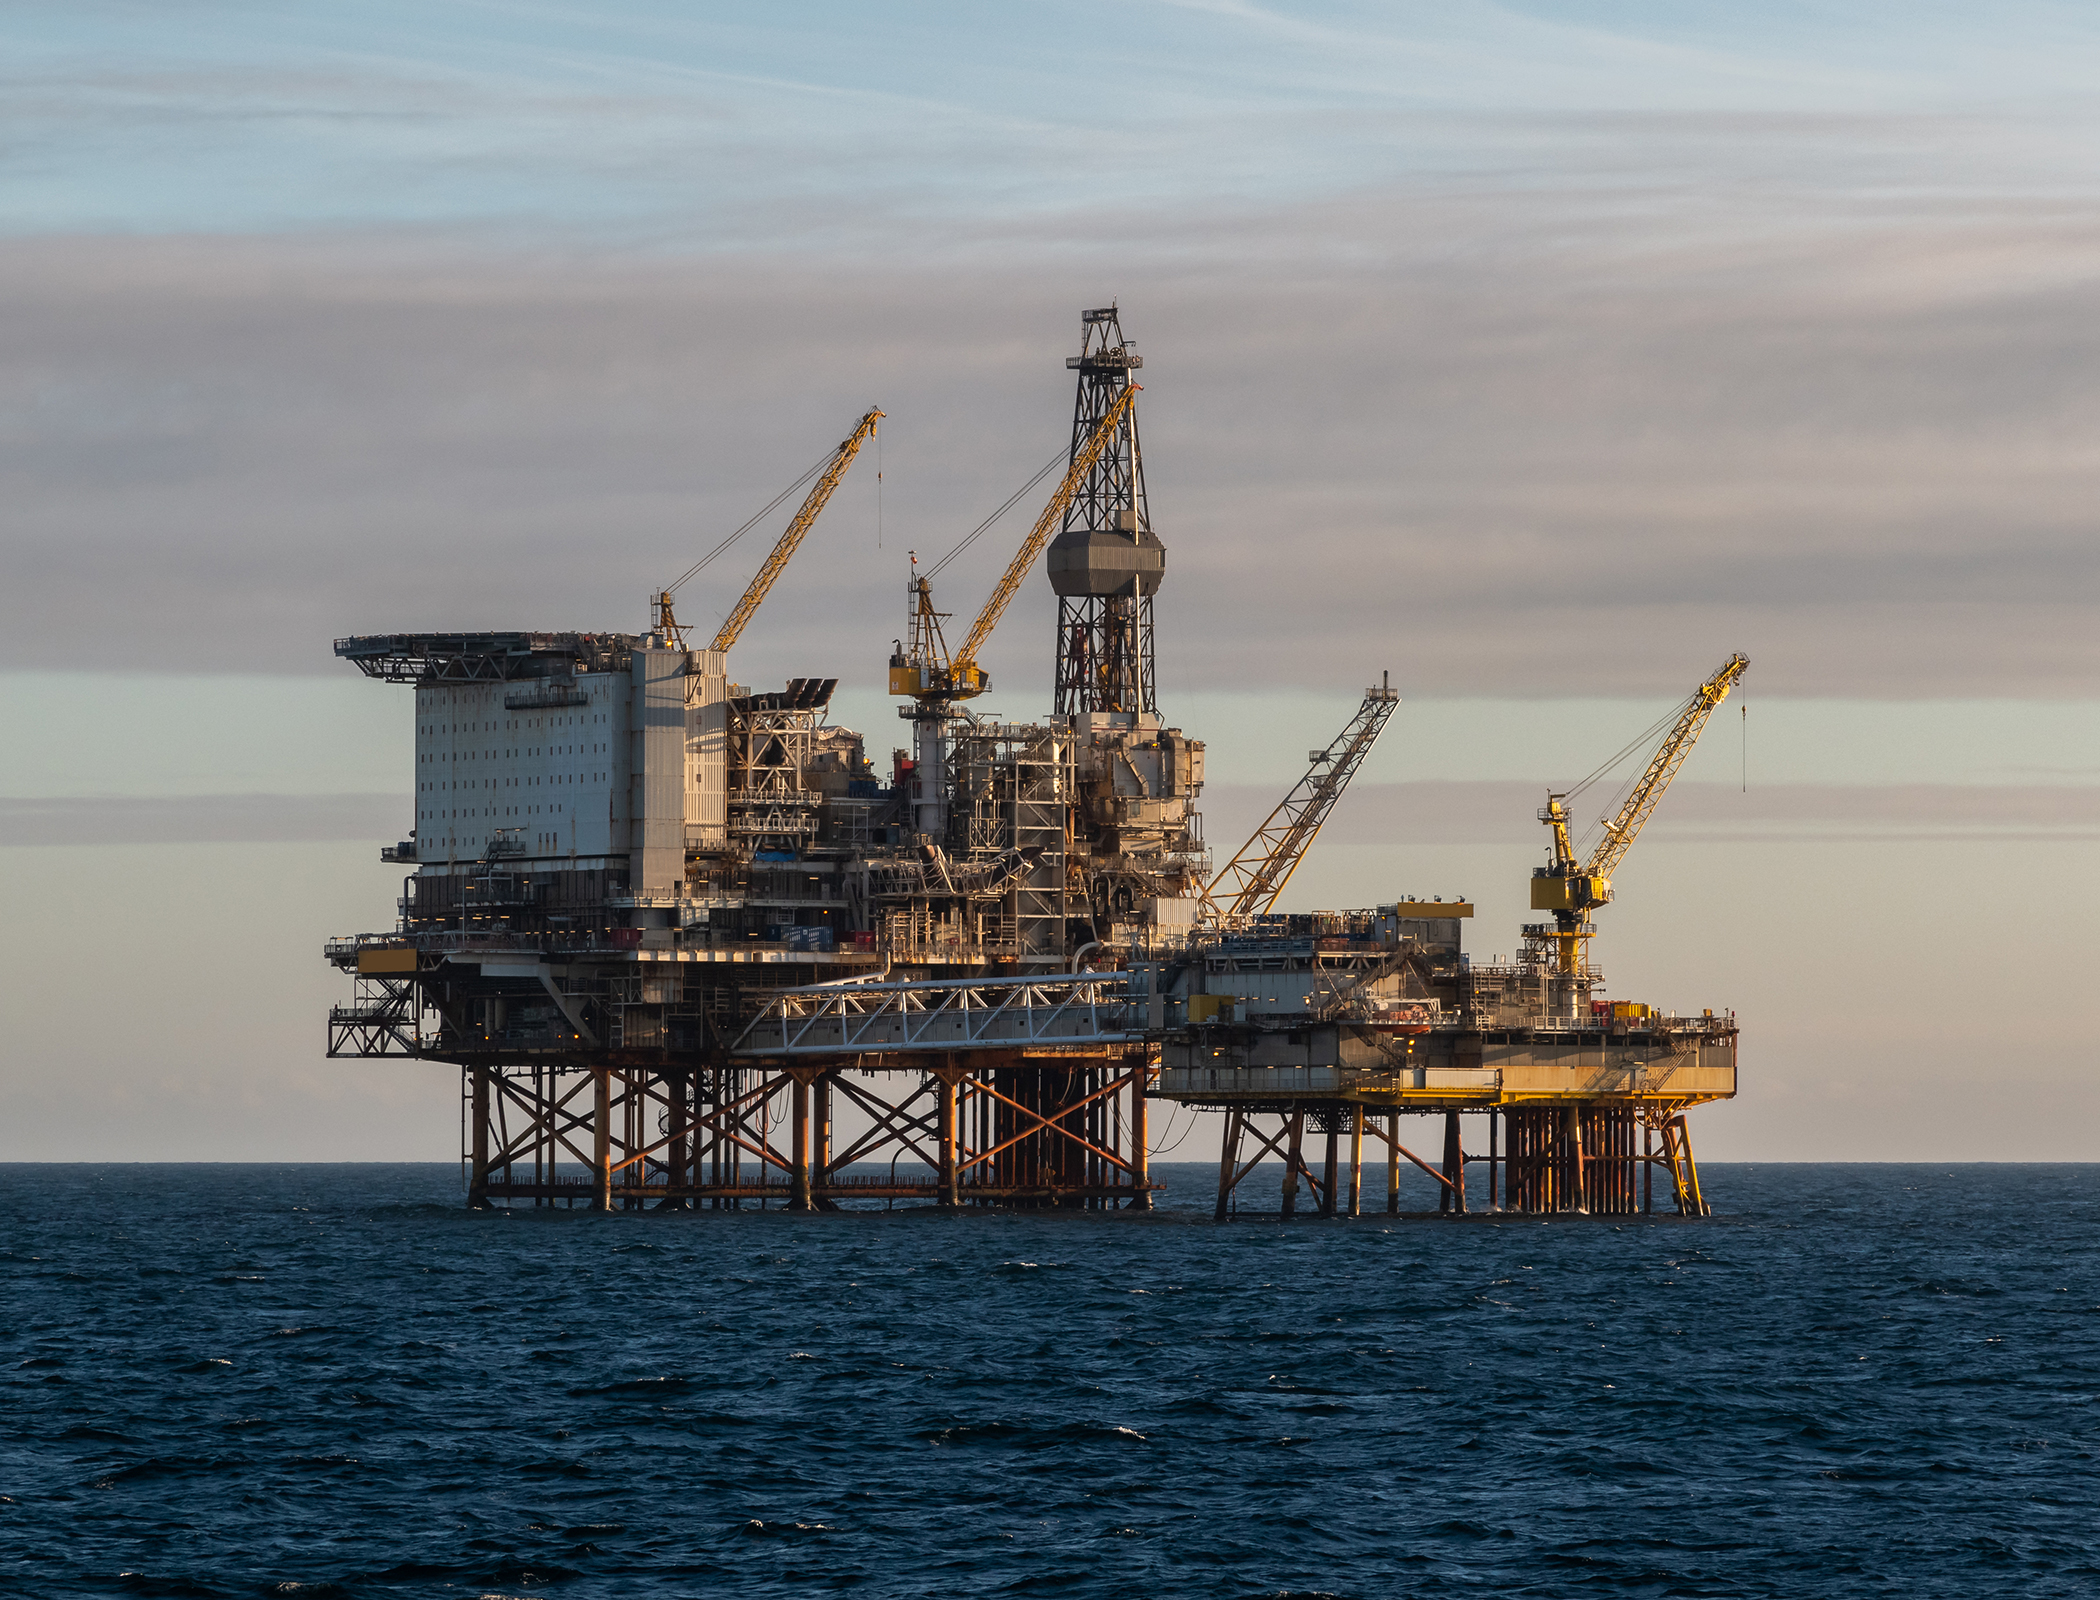 North Sea oil sector appeals for more investment to help it decarbonise